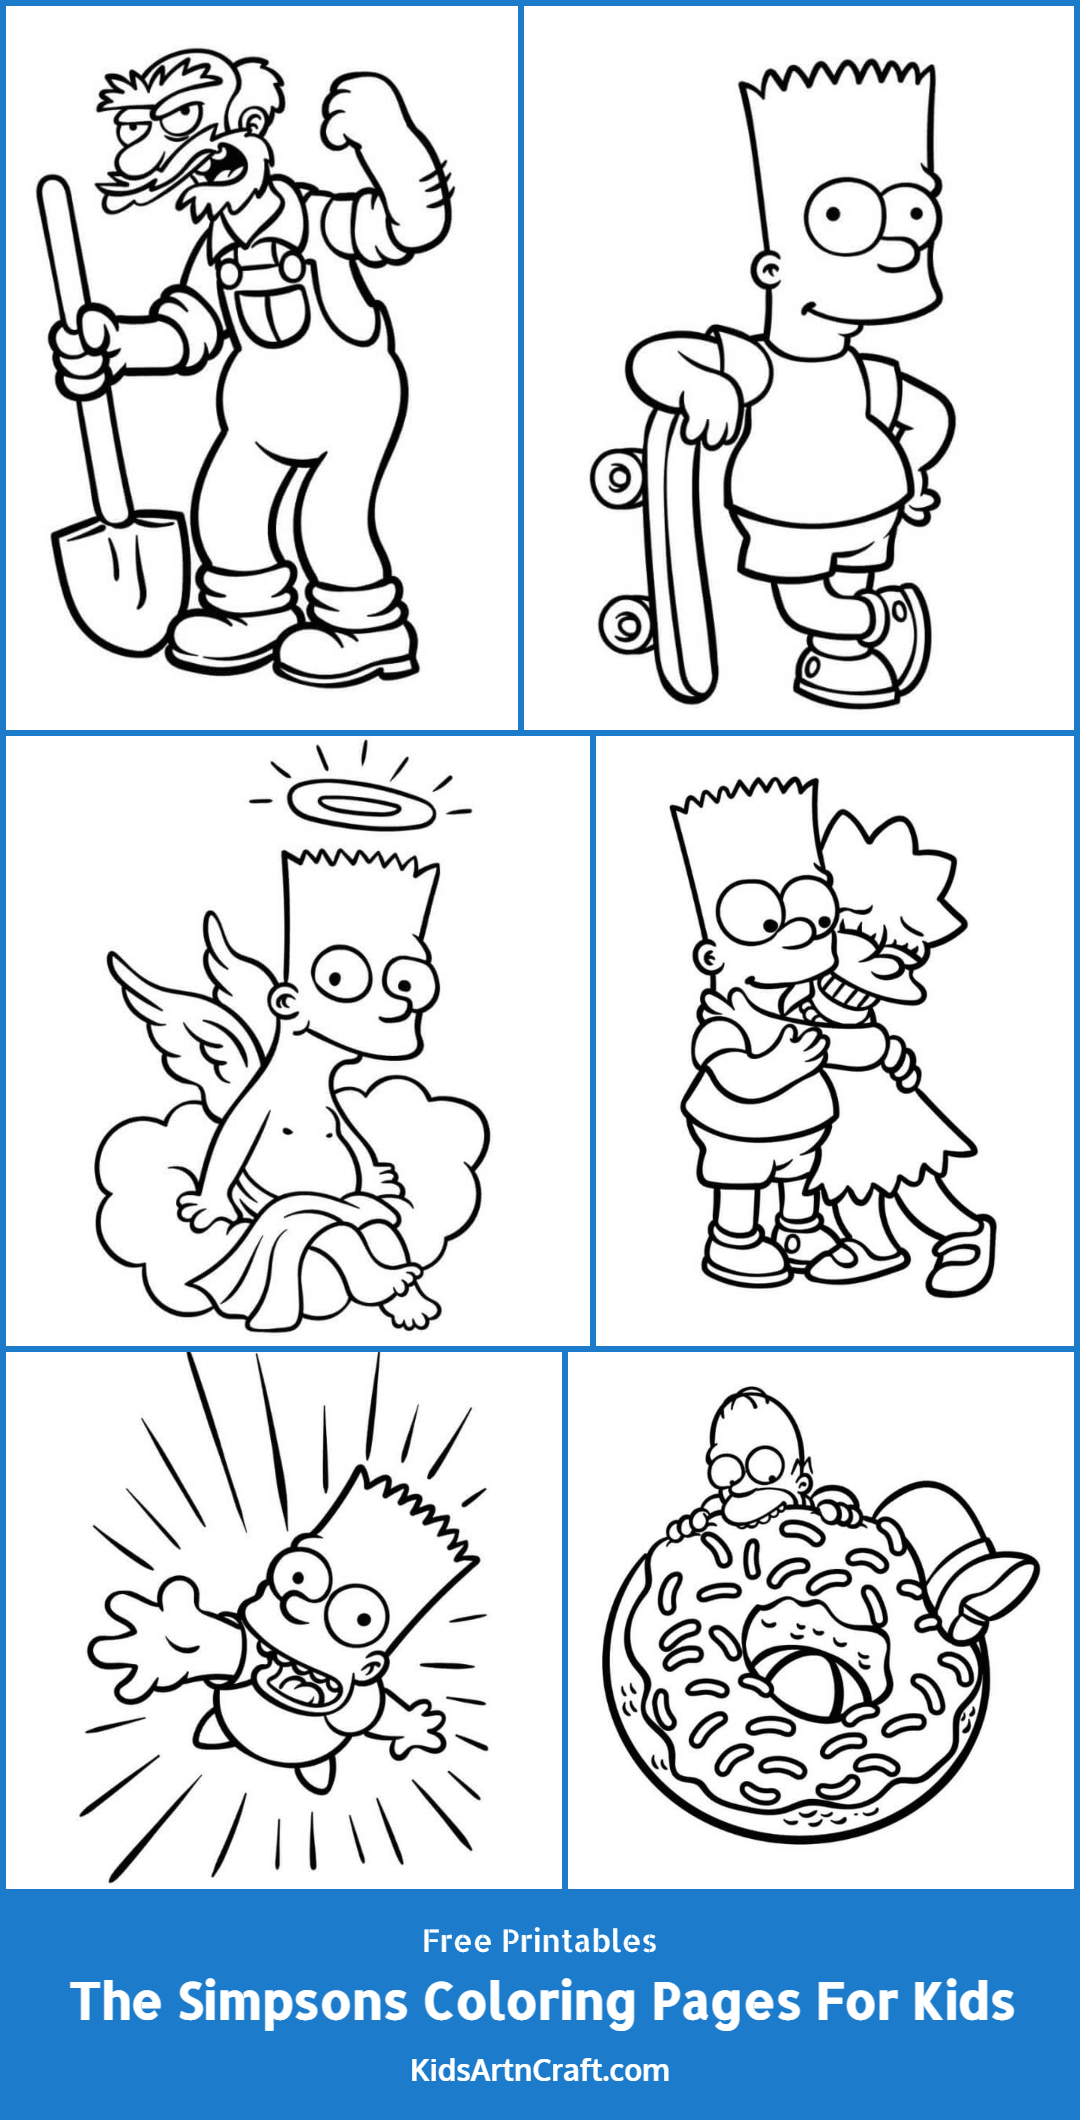 The Simpsons Coloring Pages For Kids – Free Printables